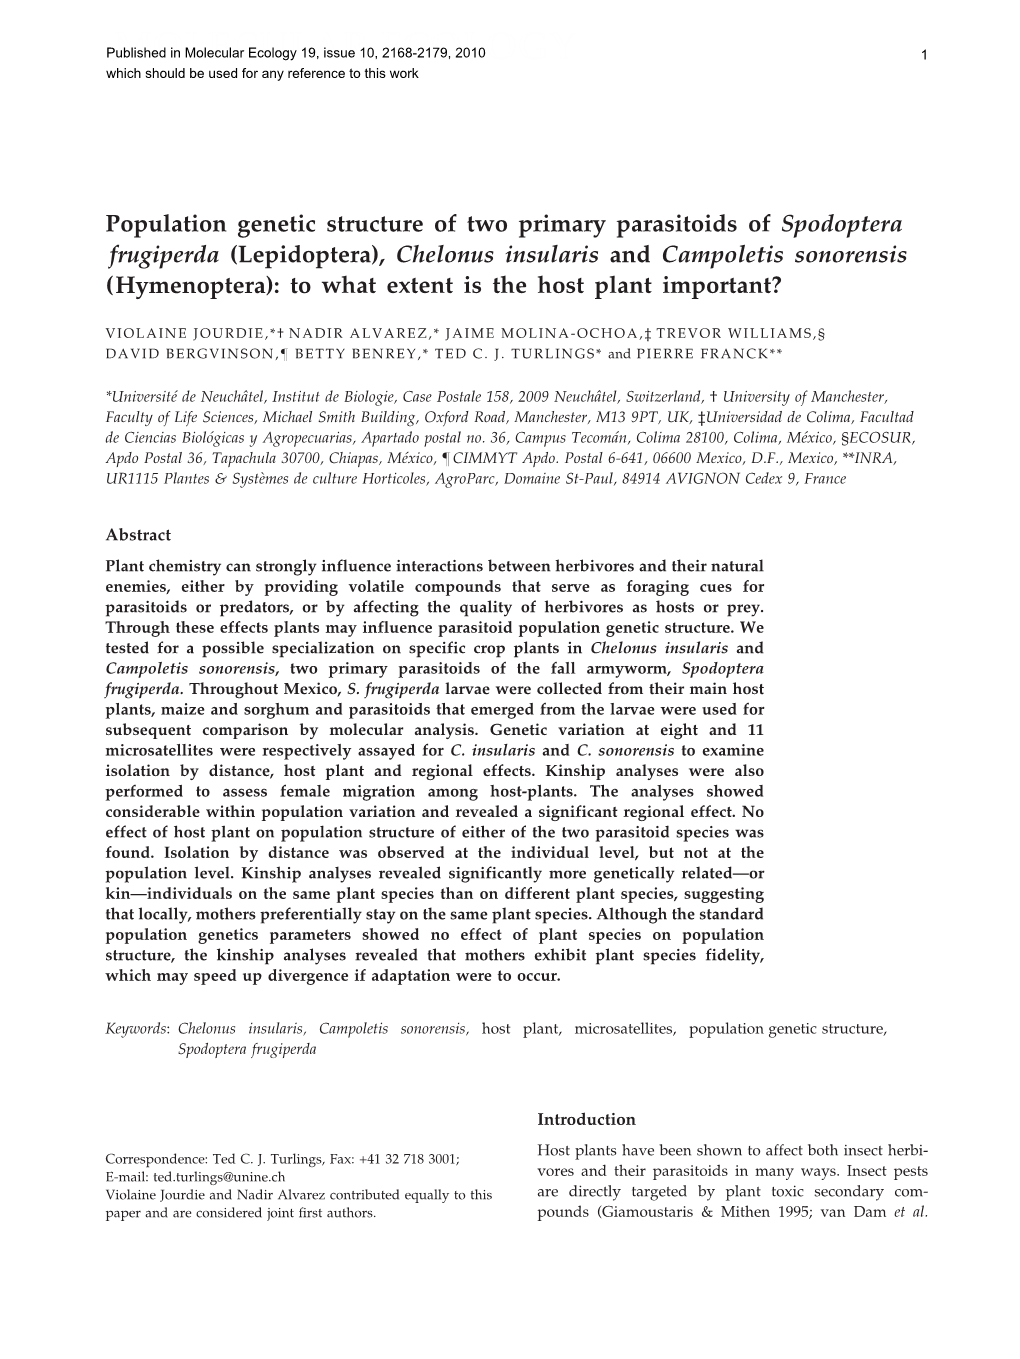 Population Genetic Structure of Two Primary Parasitoids of Spodoptera Frugiperda (Lepidoptera), Chelonus Insularis and Campoleti